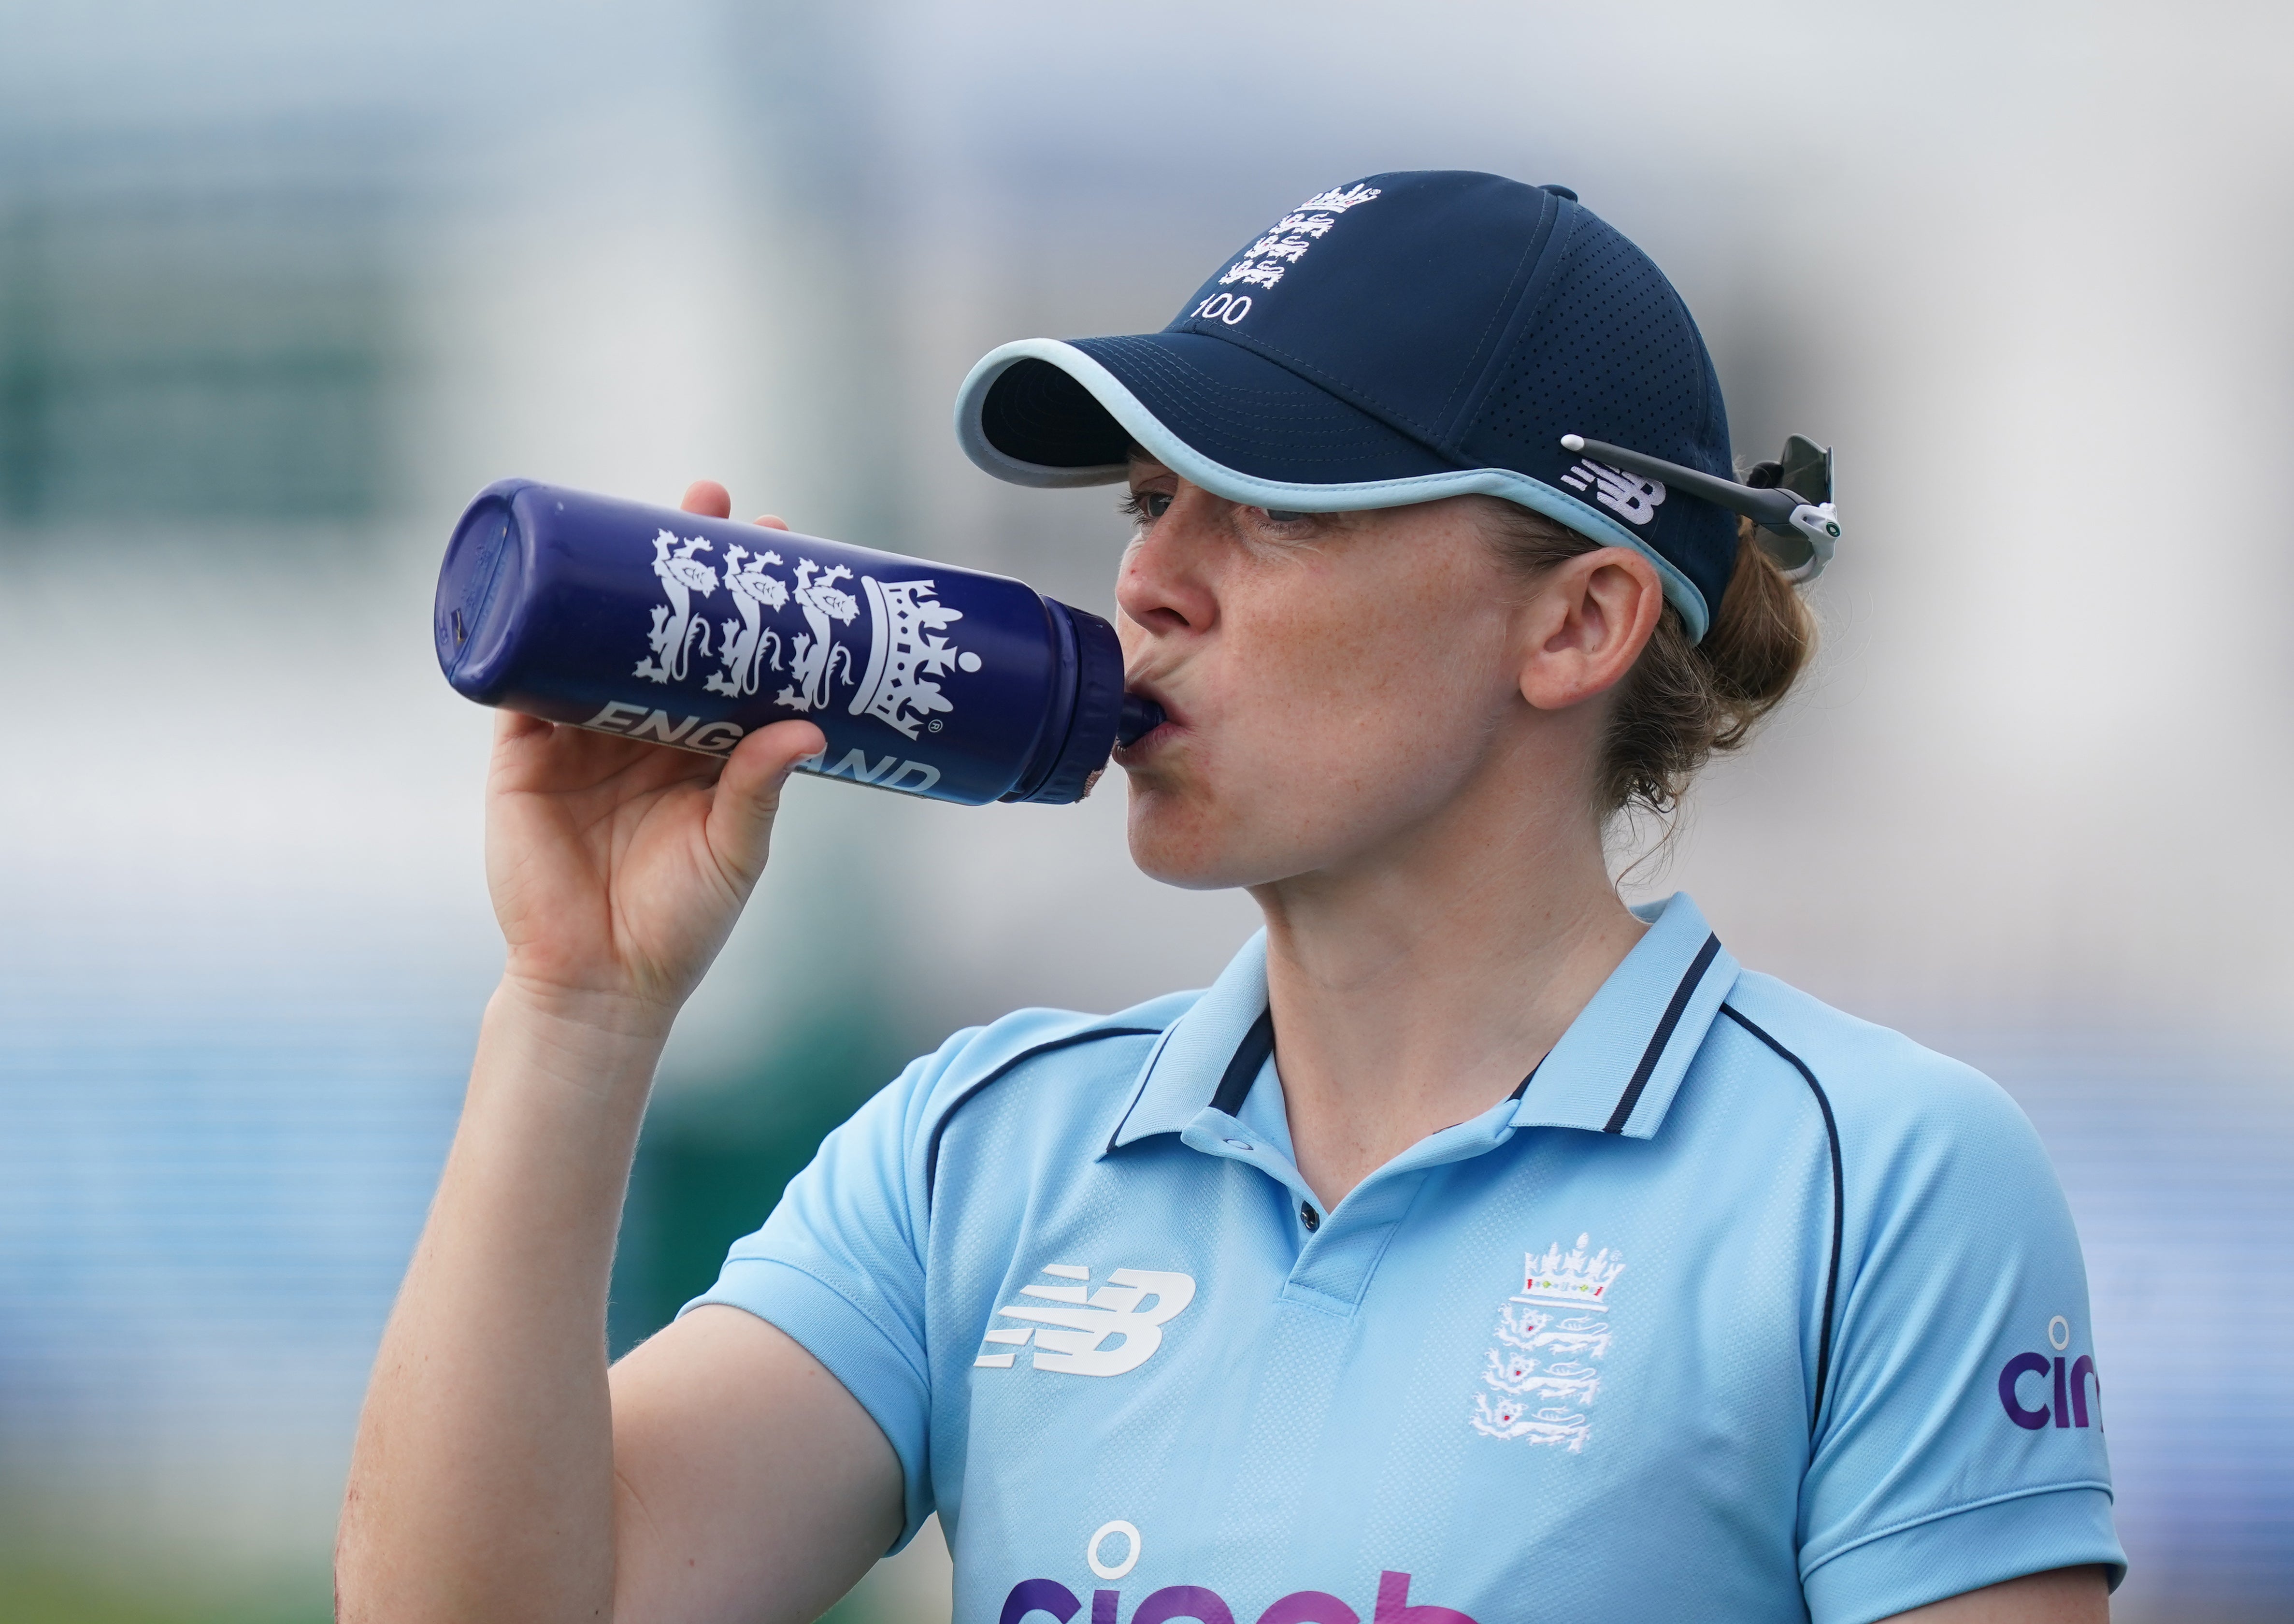 England captain Heather Knight says the right decision has been made (Mike Egerton/PA)